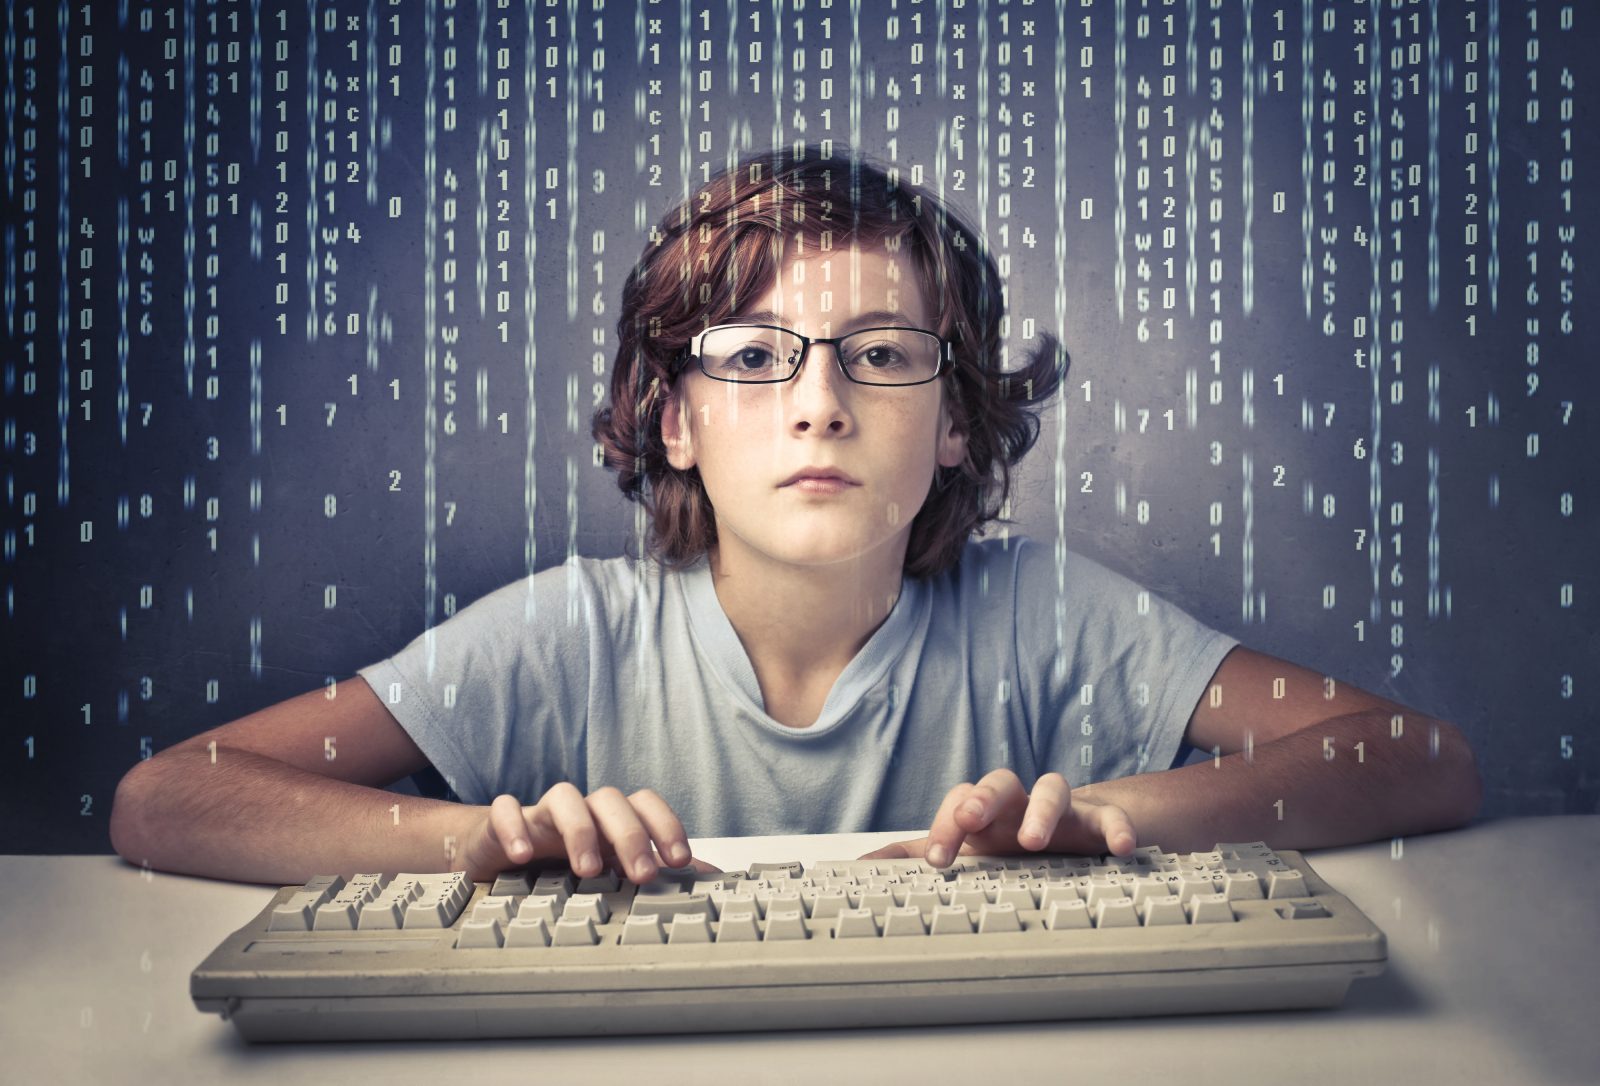 6 Cyber Safety Tips For Your Tech-Savvy Teen